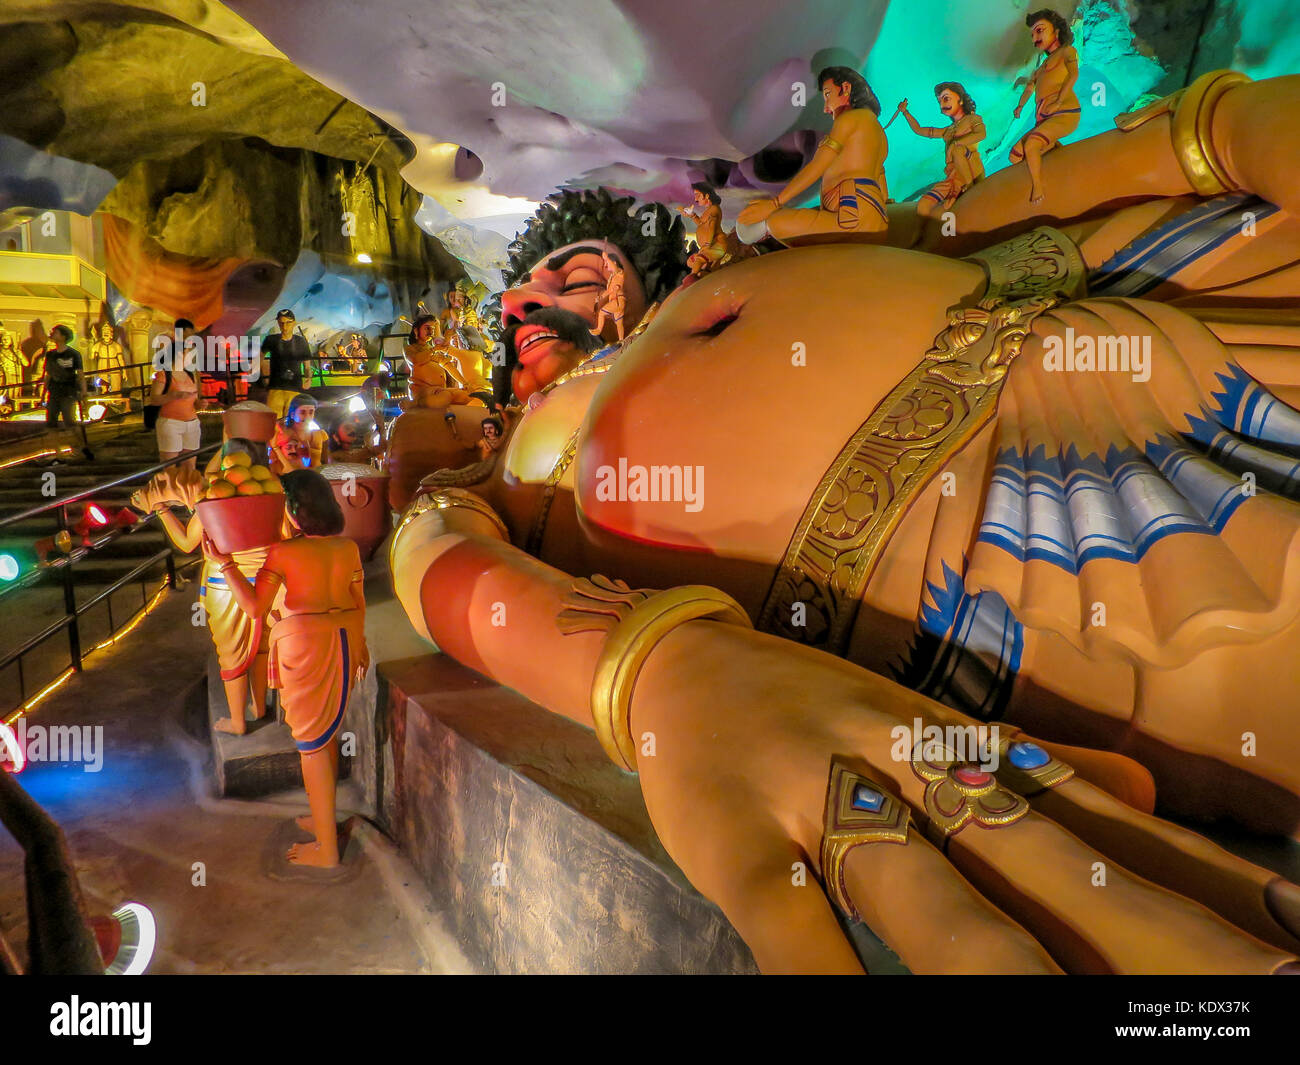 One of several Hinduism religious dioramas inside the Ramayana Cave at the Batu Caves just outside of Kuala Lumpur, Malaysia. Stock Photo